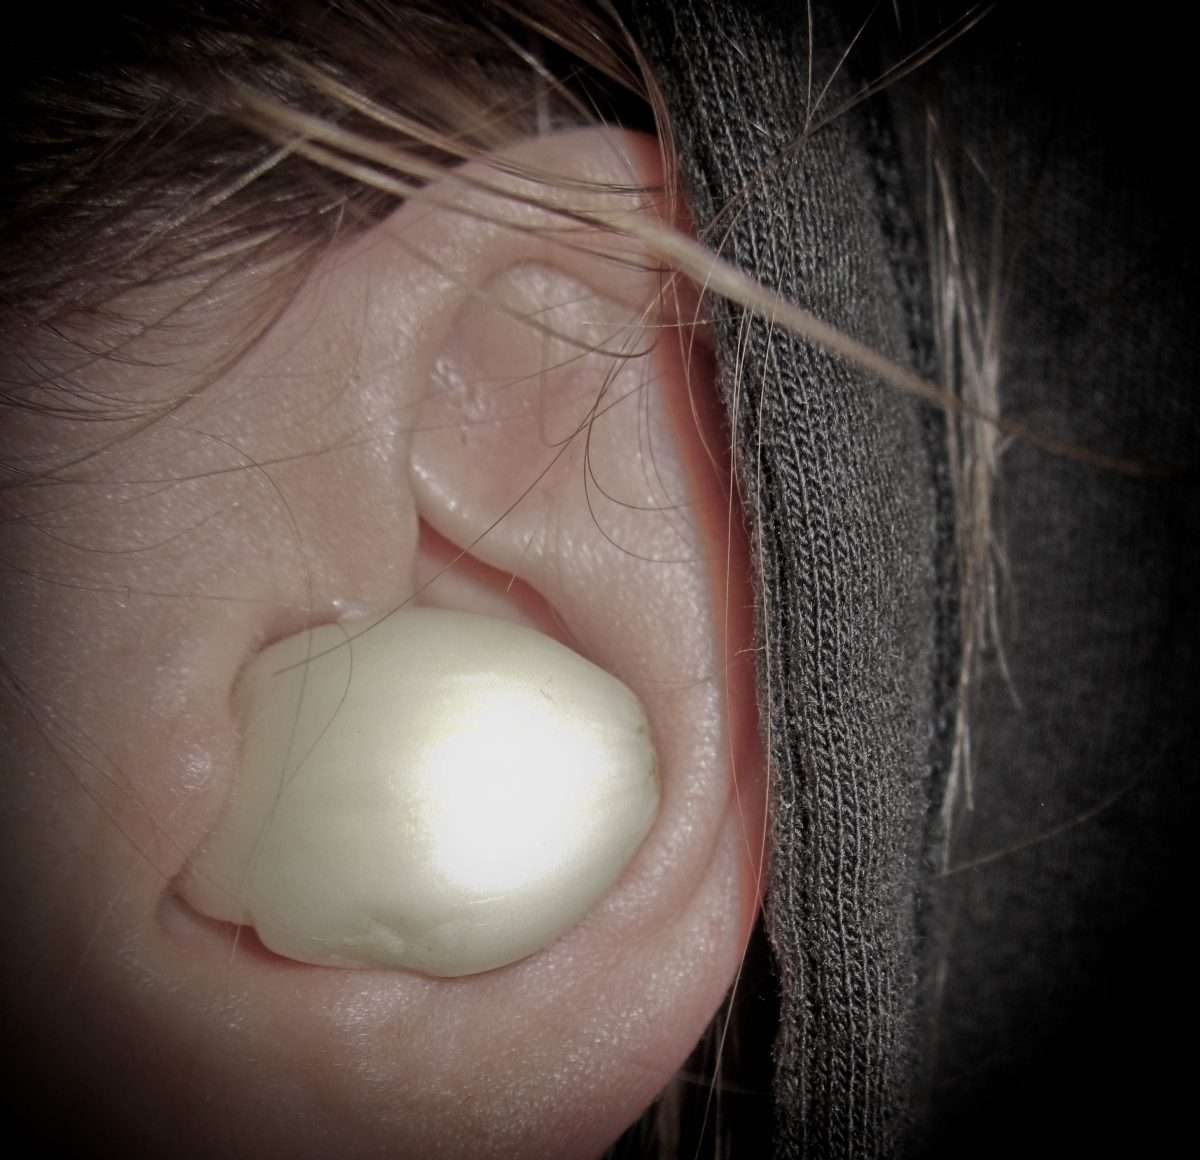 How To Get An Ear Infection